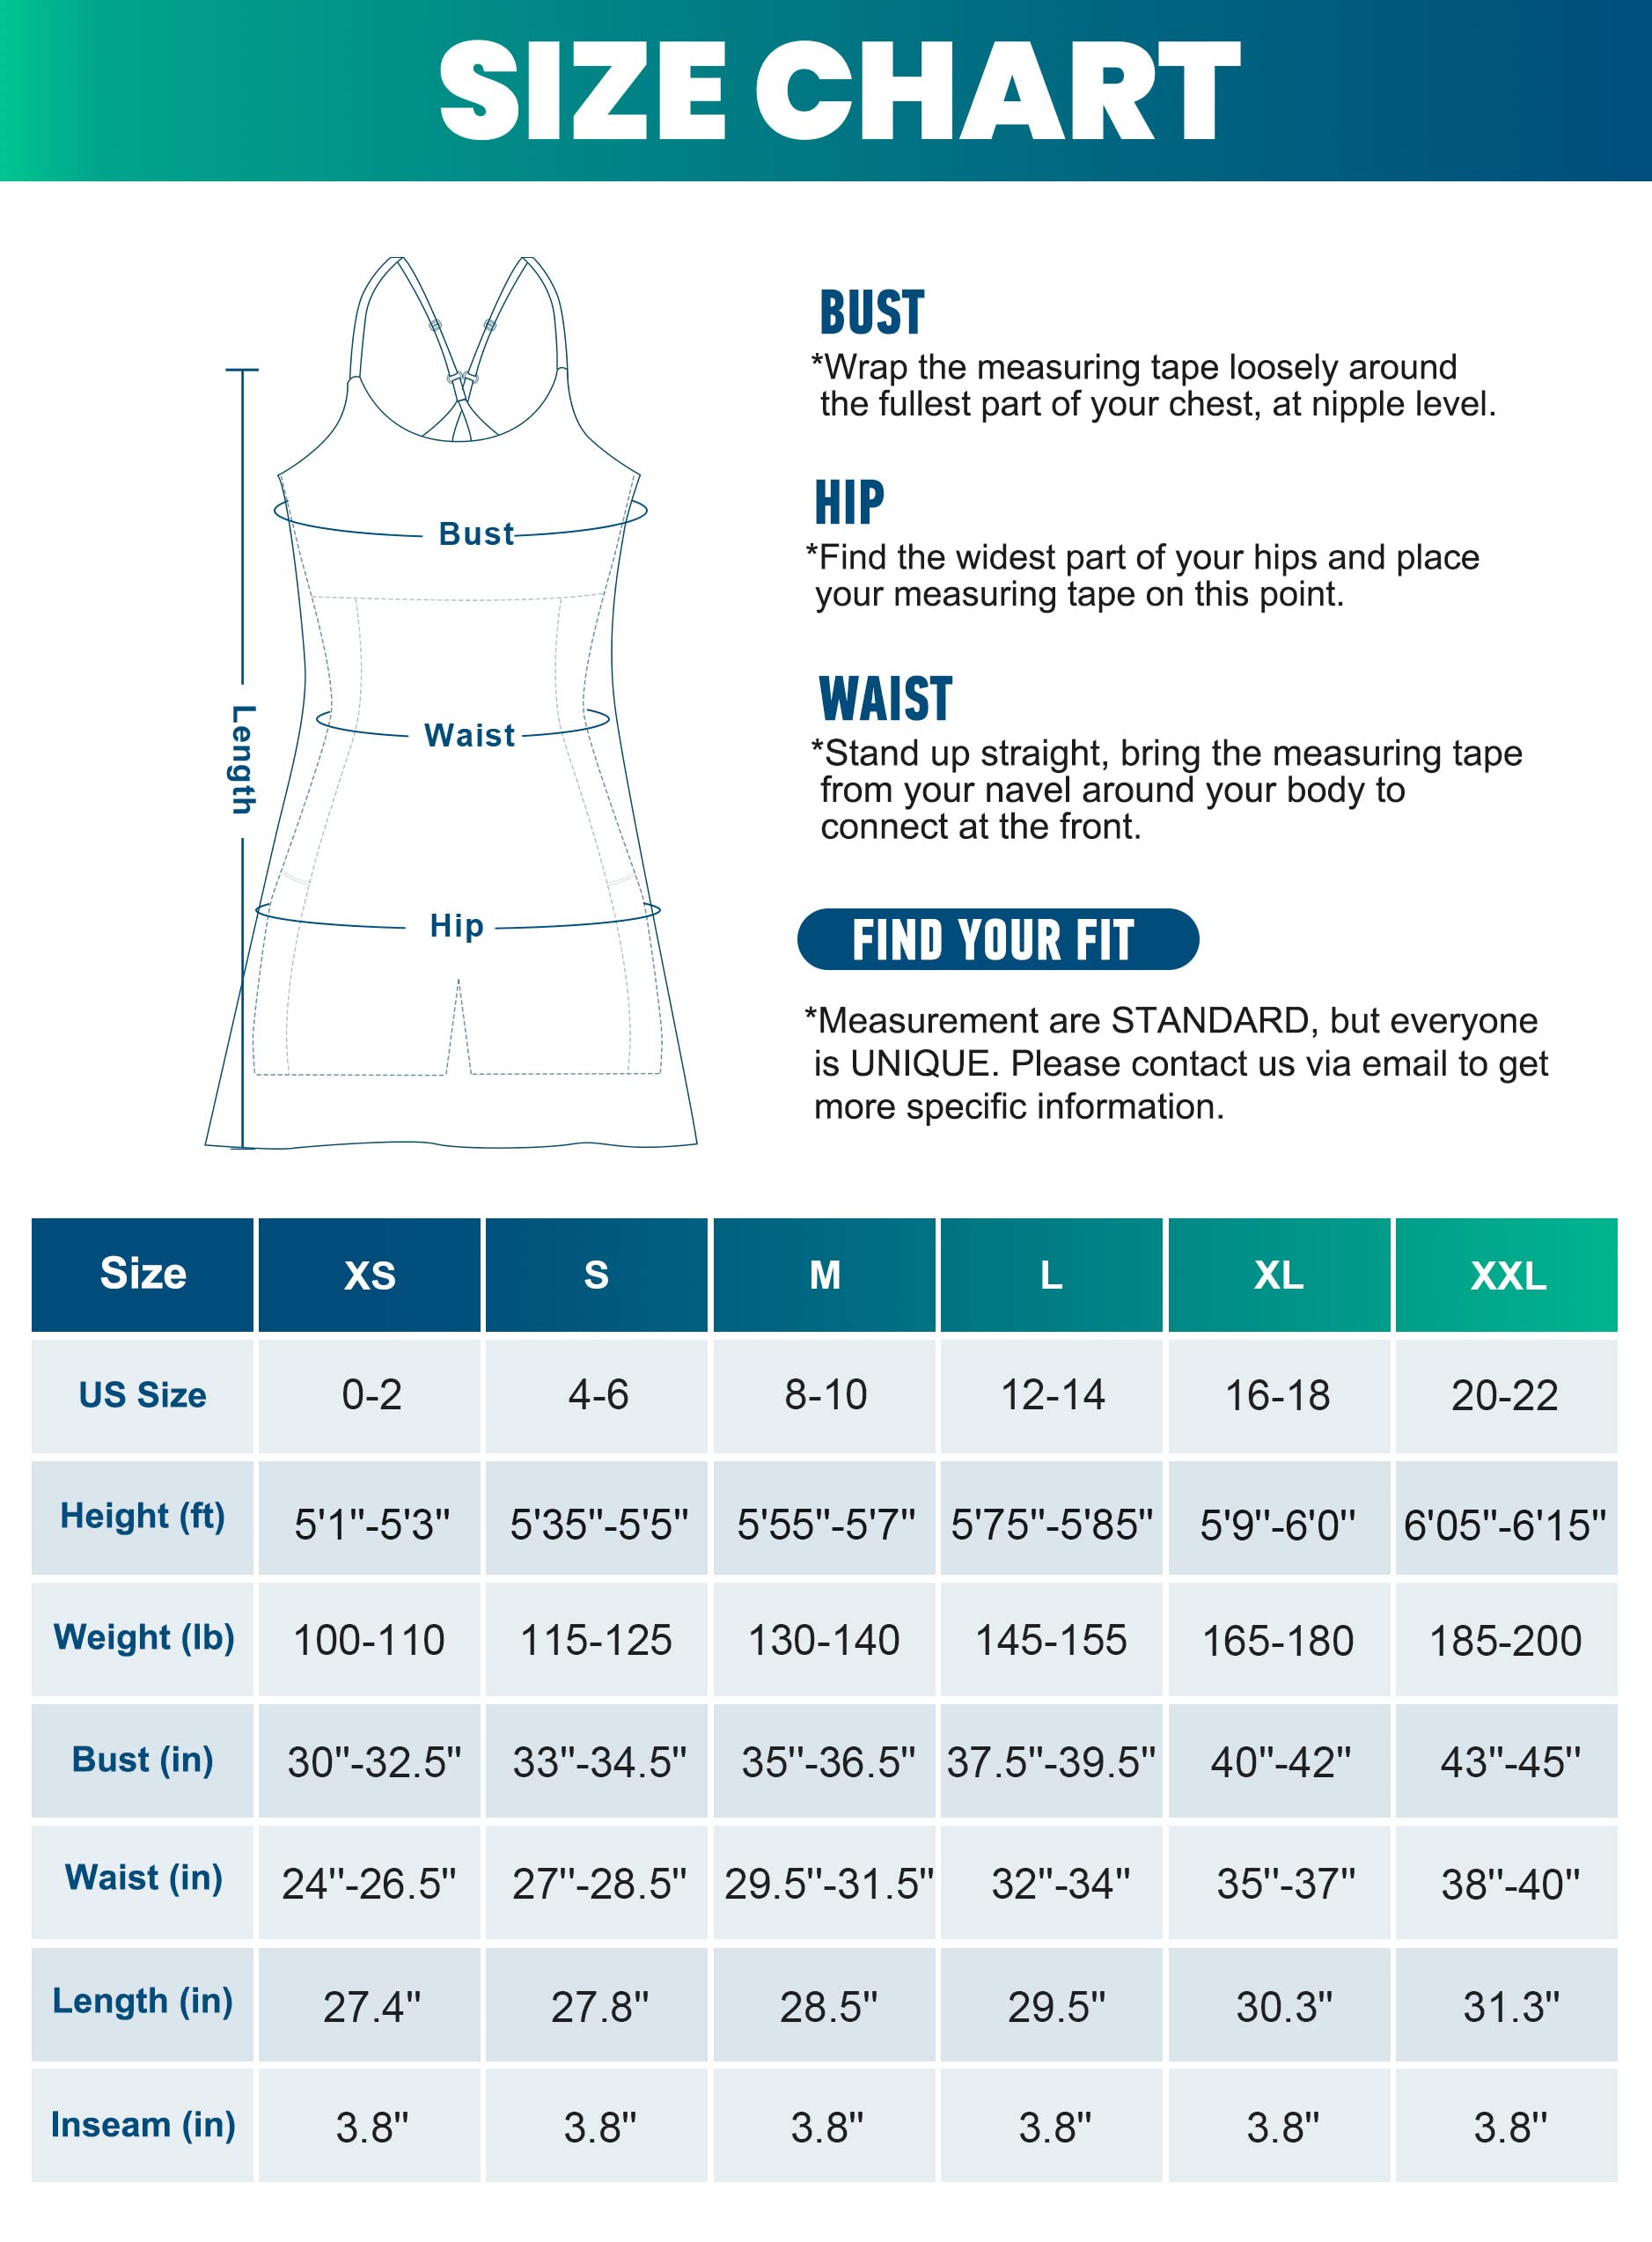 Womens Tennis Dress, Workout Dress with Built-in Bra & Shorts Pockets Exercise Dress for Golf Athletic Dresses for Women